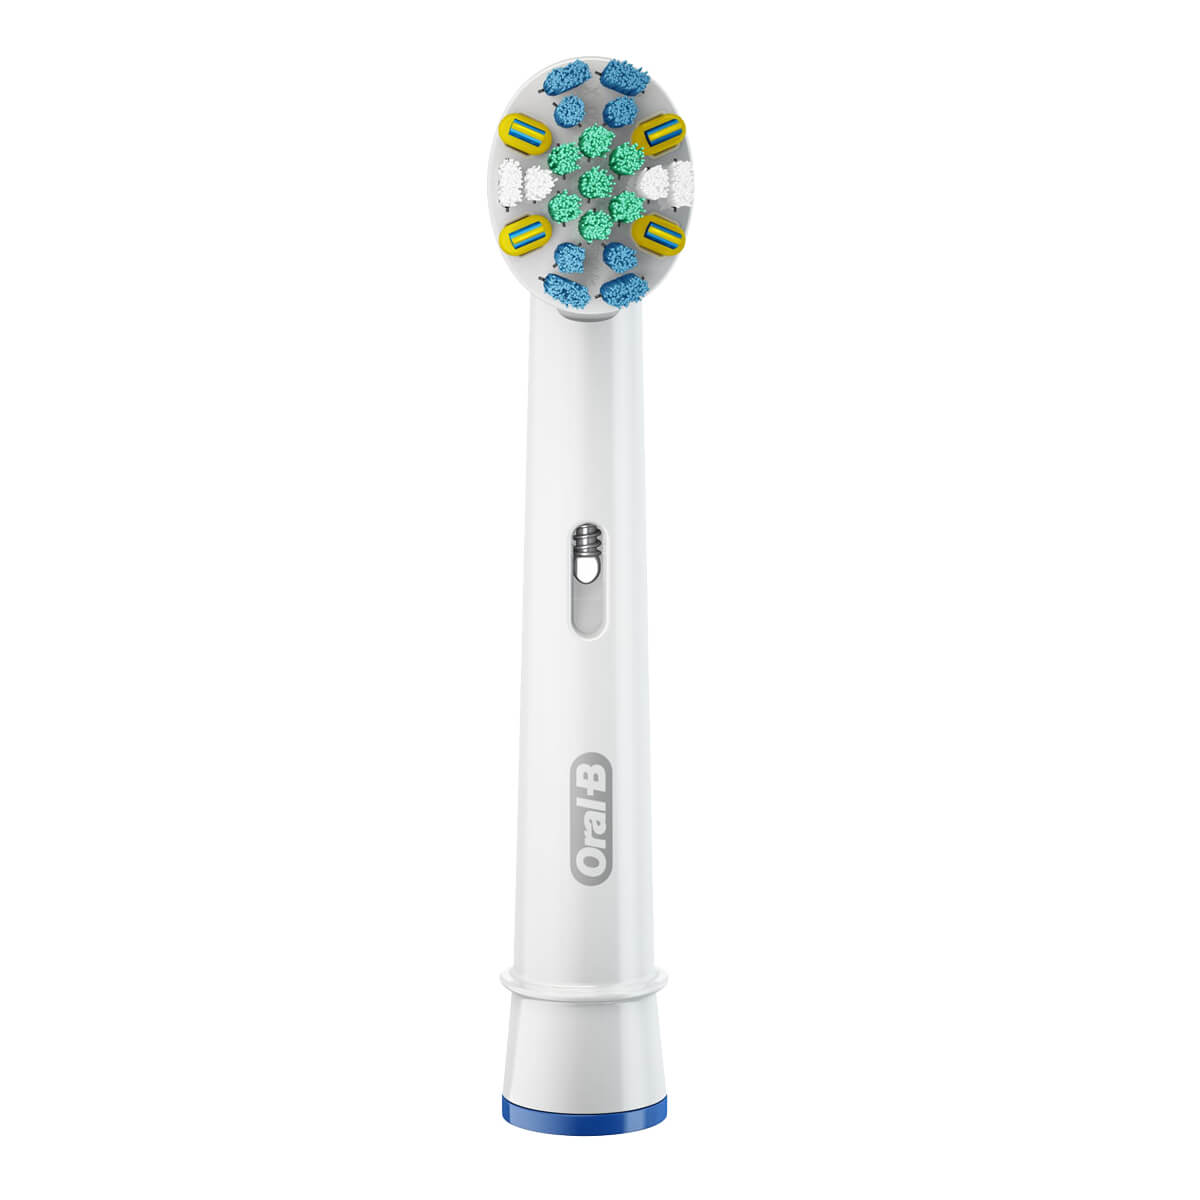 Oral-B FlossAction heads